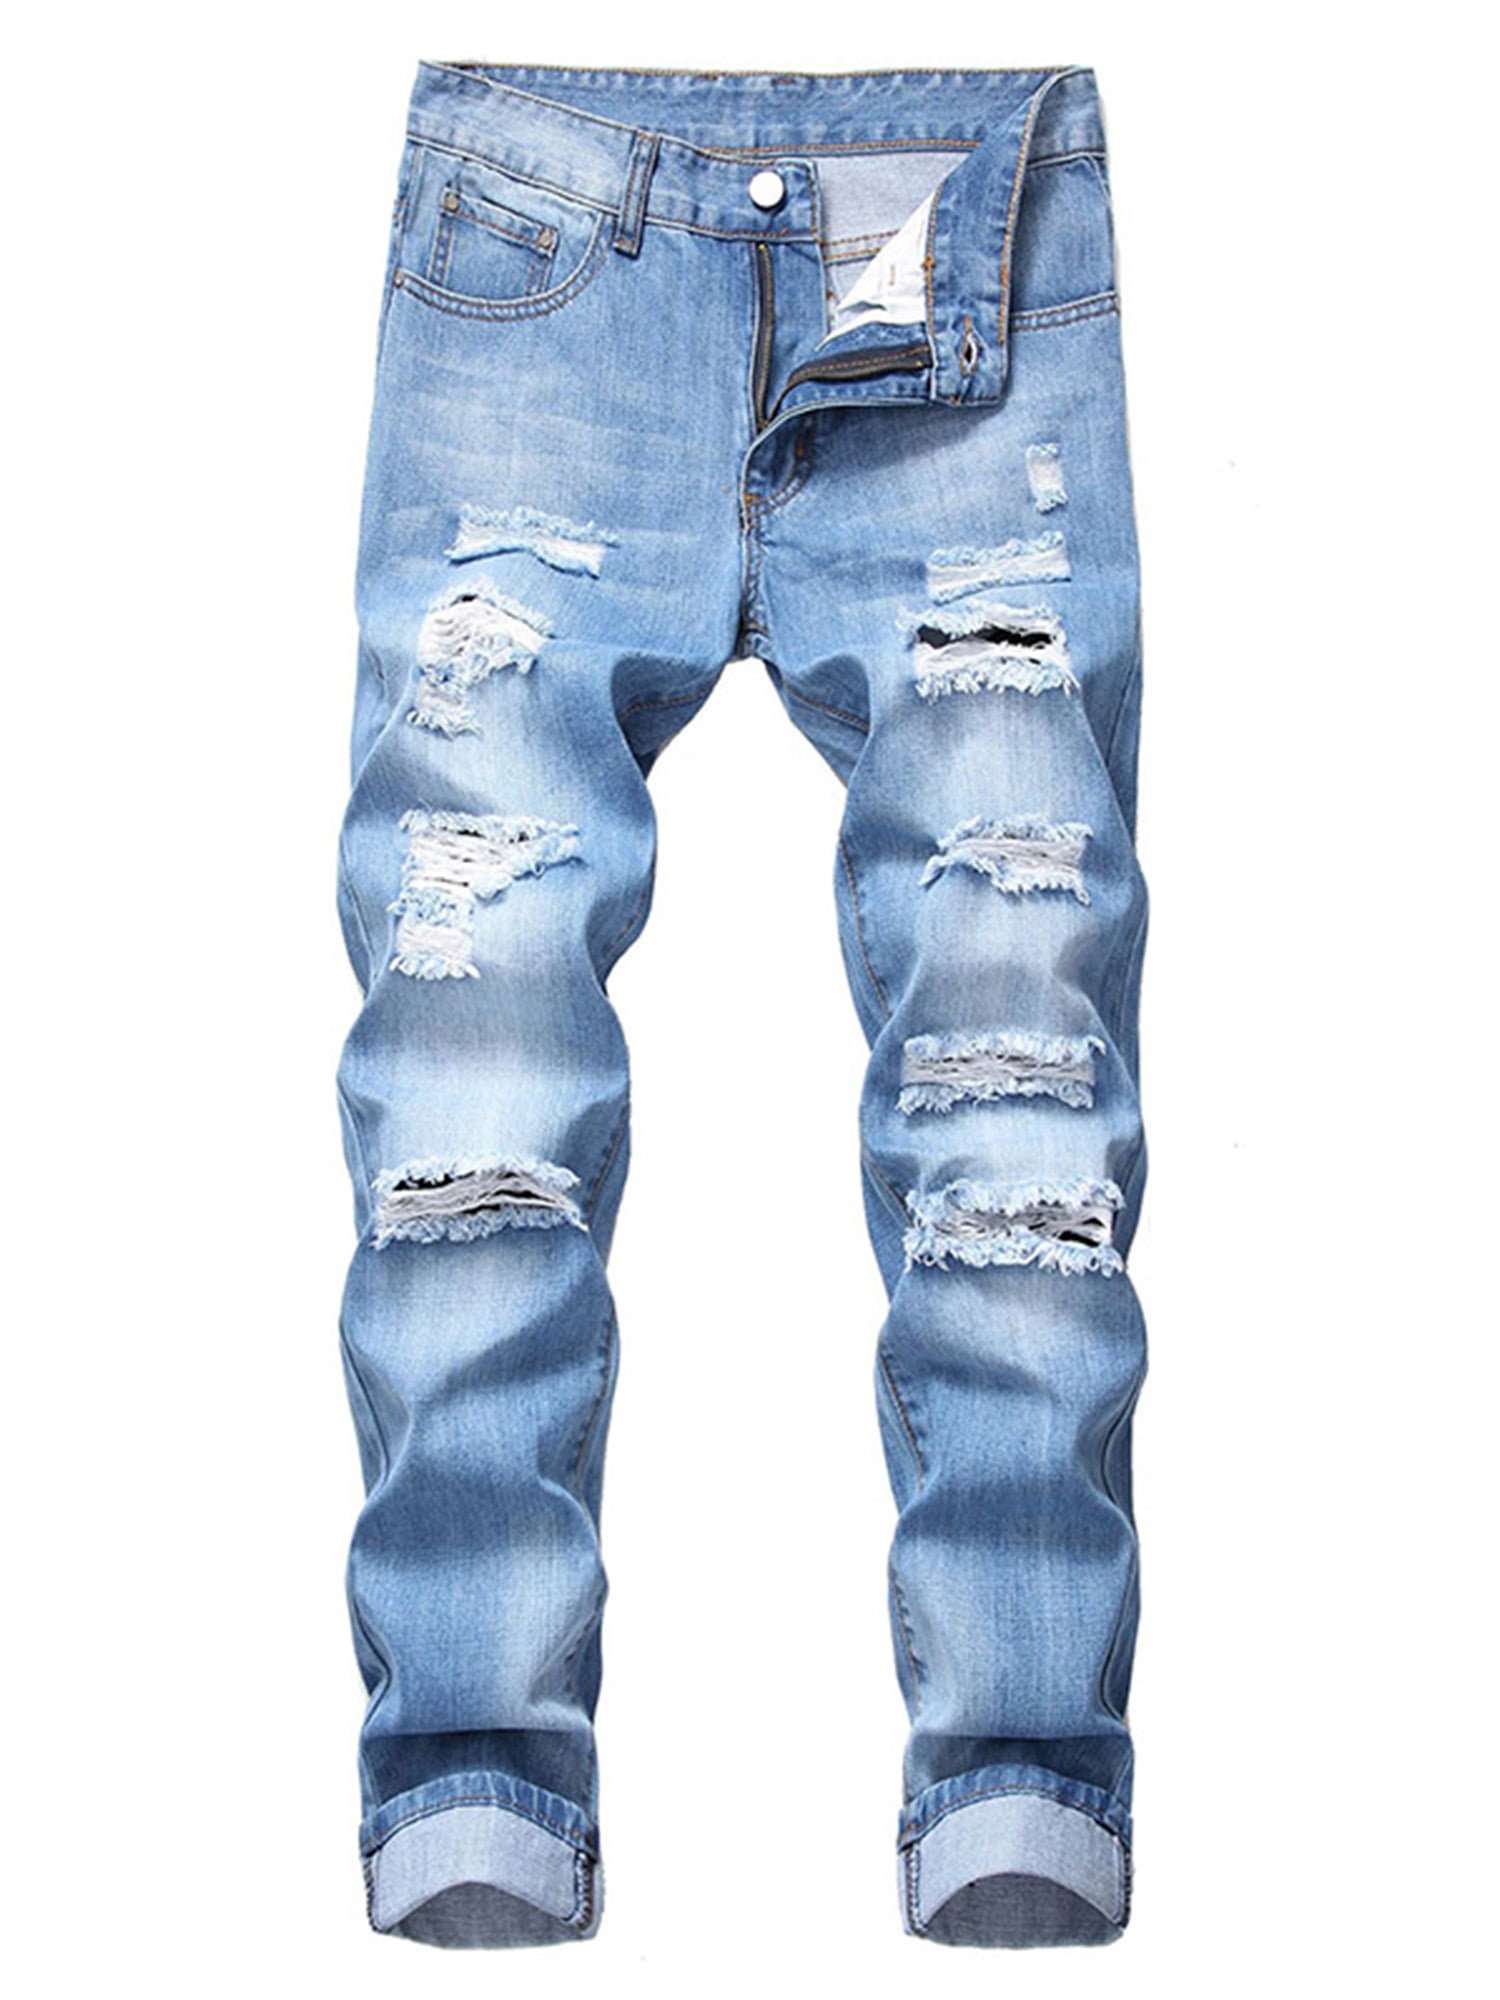 HERREN STYLE YOUNG SKINNY Fashion STONEDWASHED Destroyed FIT Blue JEANS HOSE